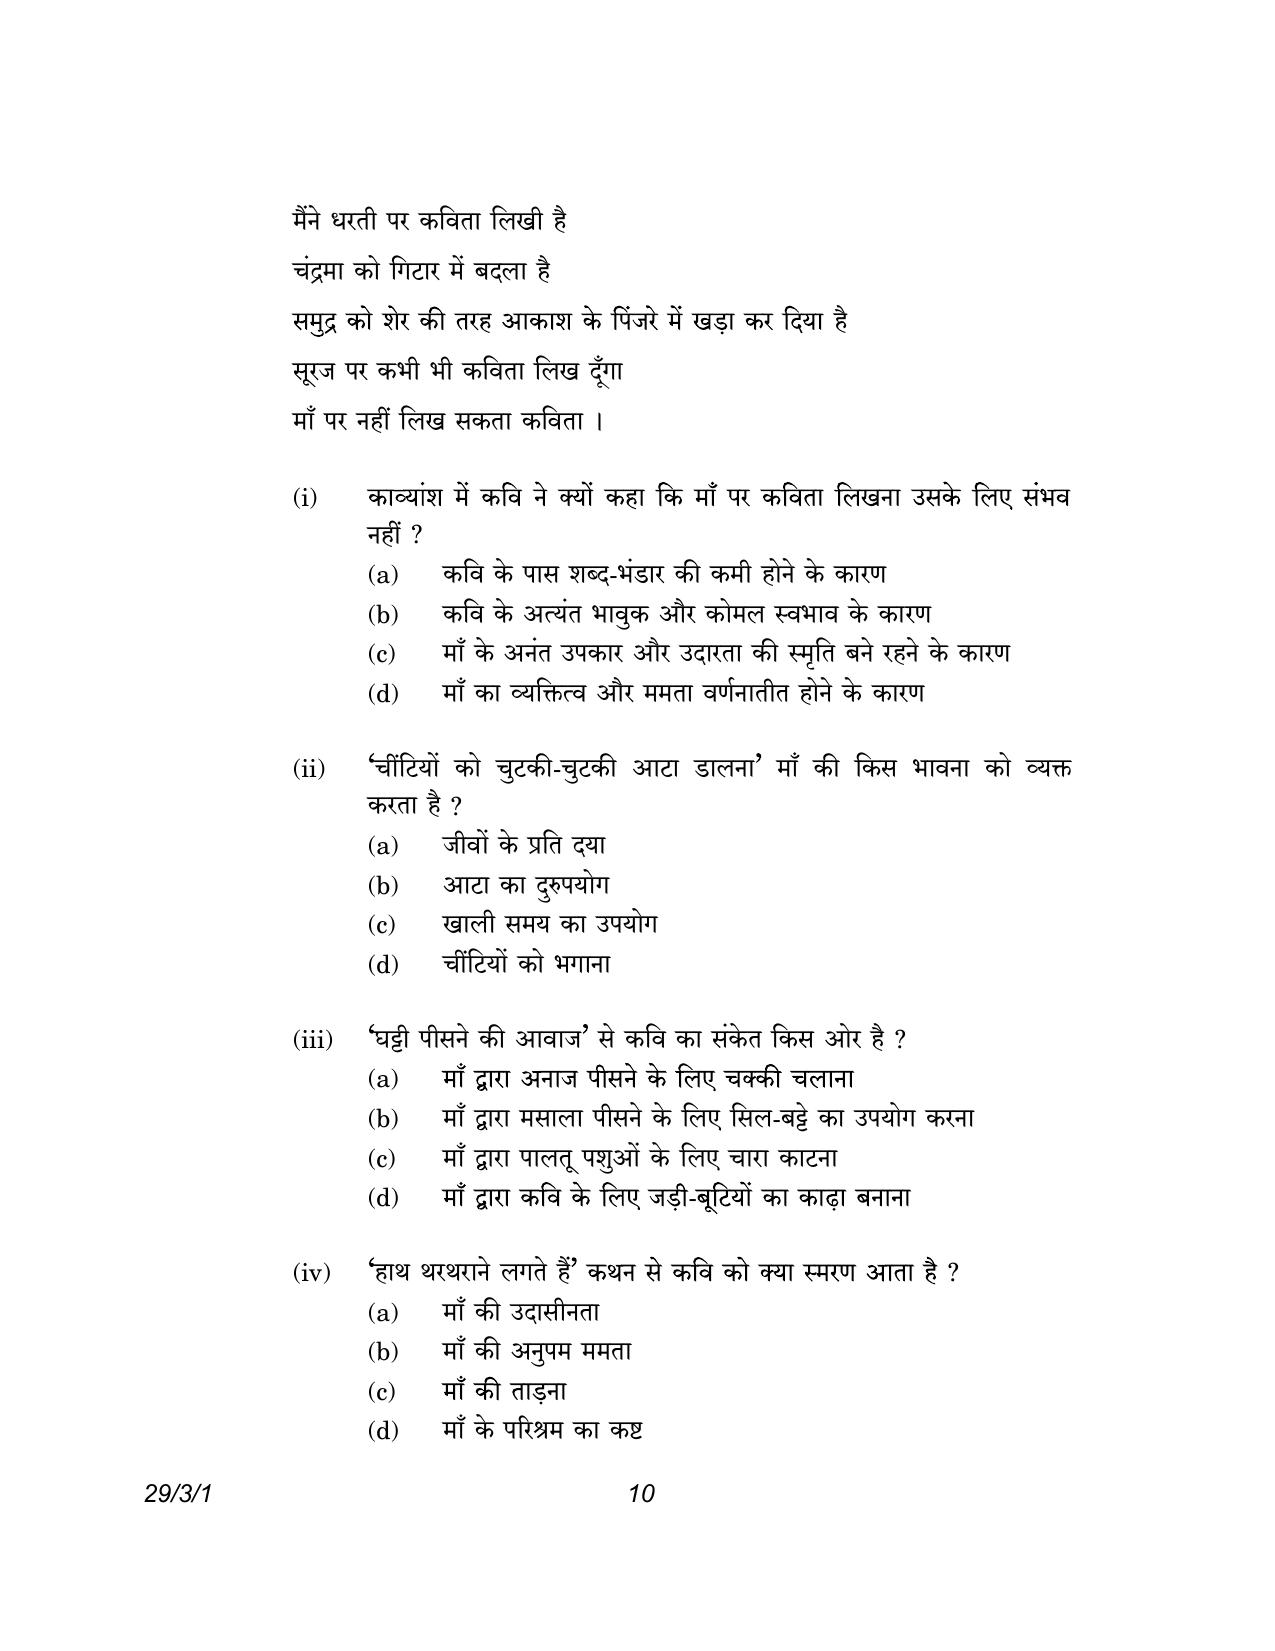 CBSE Class 12 29-3-1 Hindi Elective 2023 Question Paper - Page 10